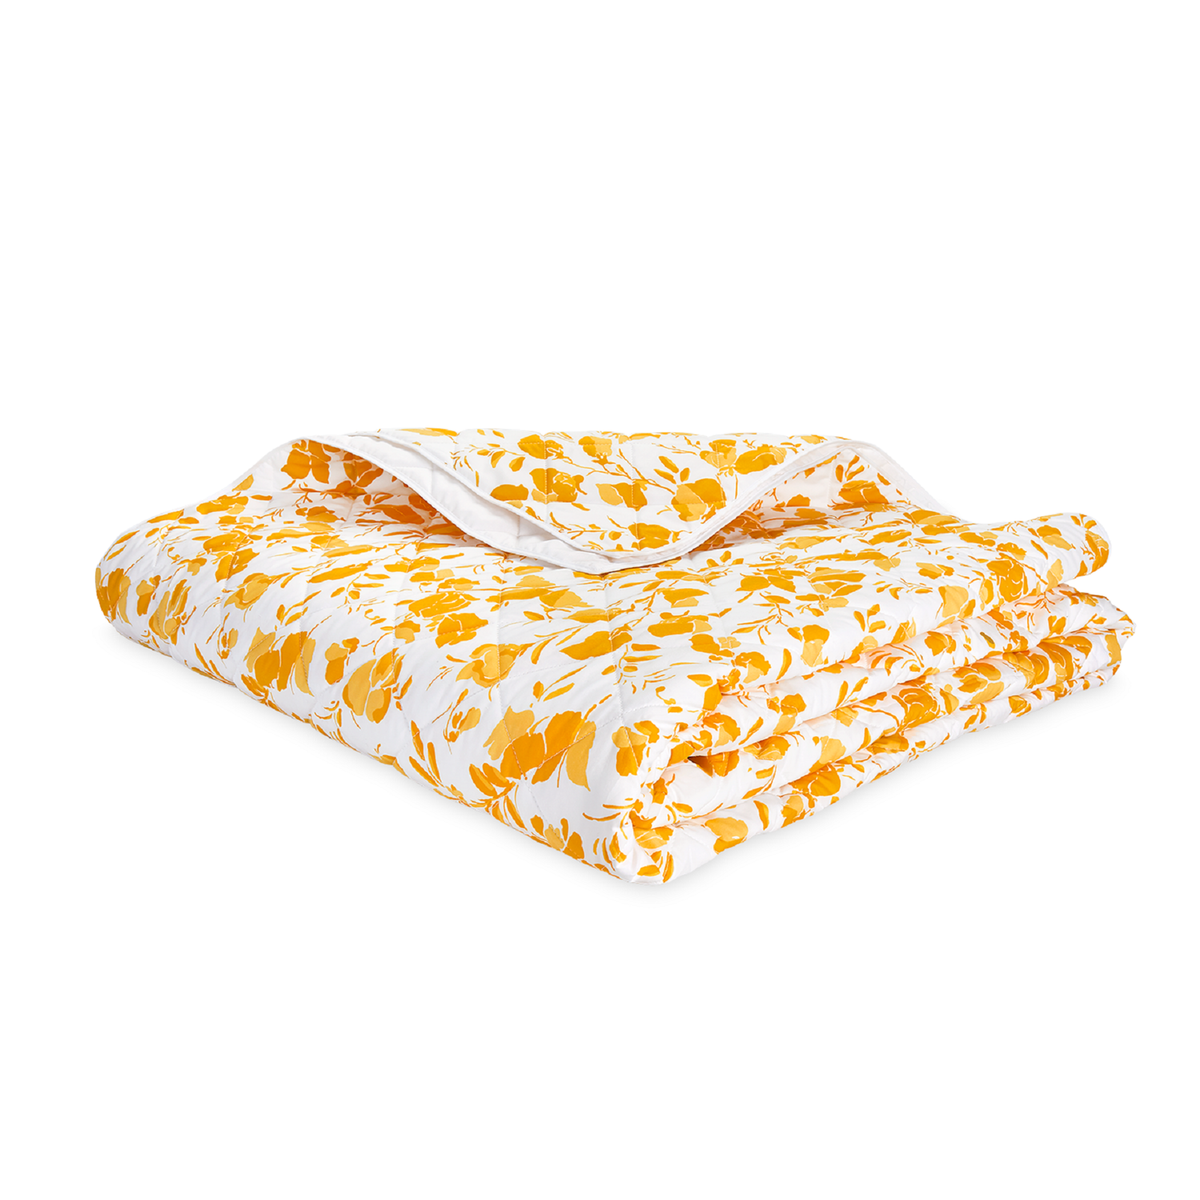 Quilted Coverlet of Matouk Alexandra Bedding Goldenrod Color